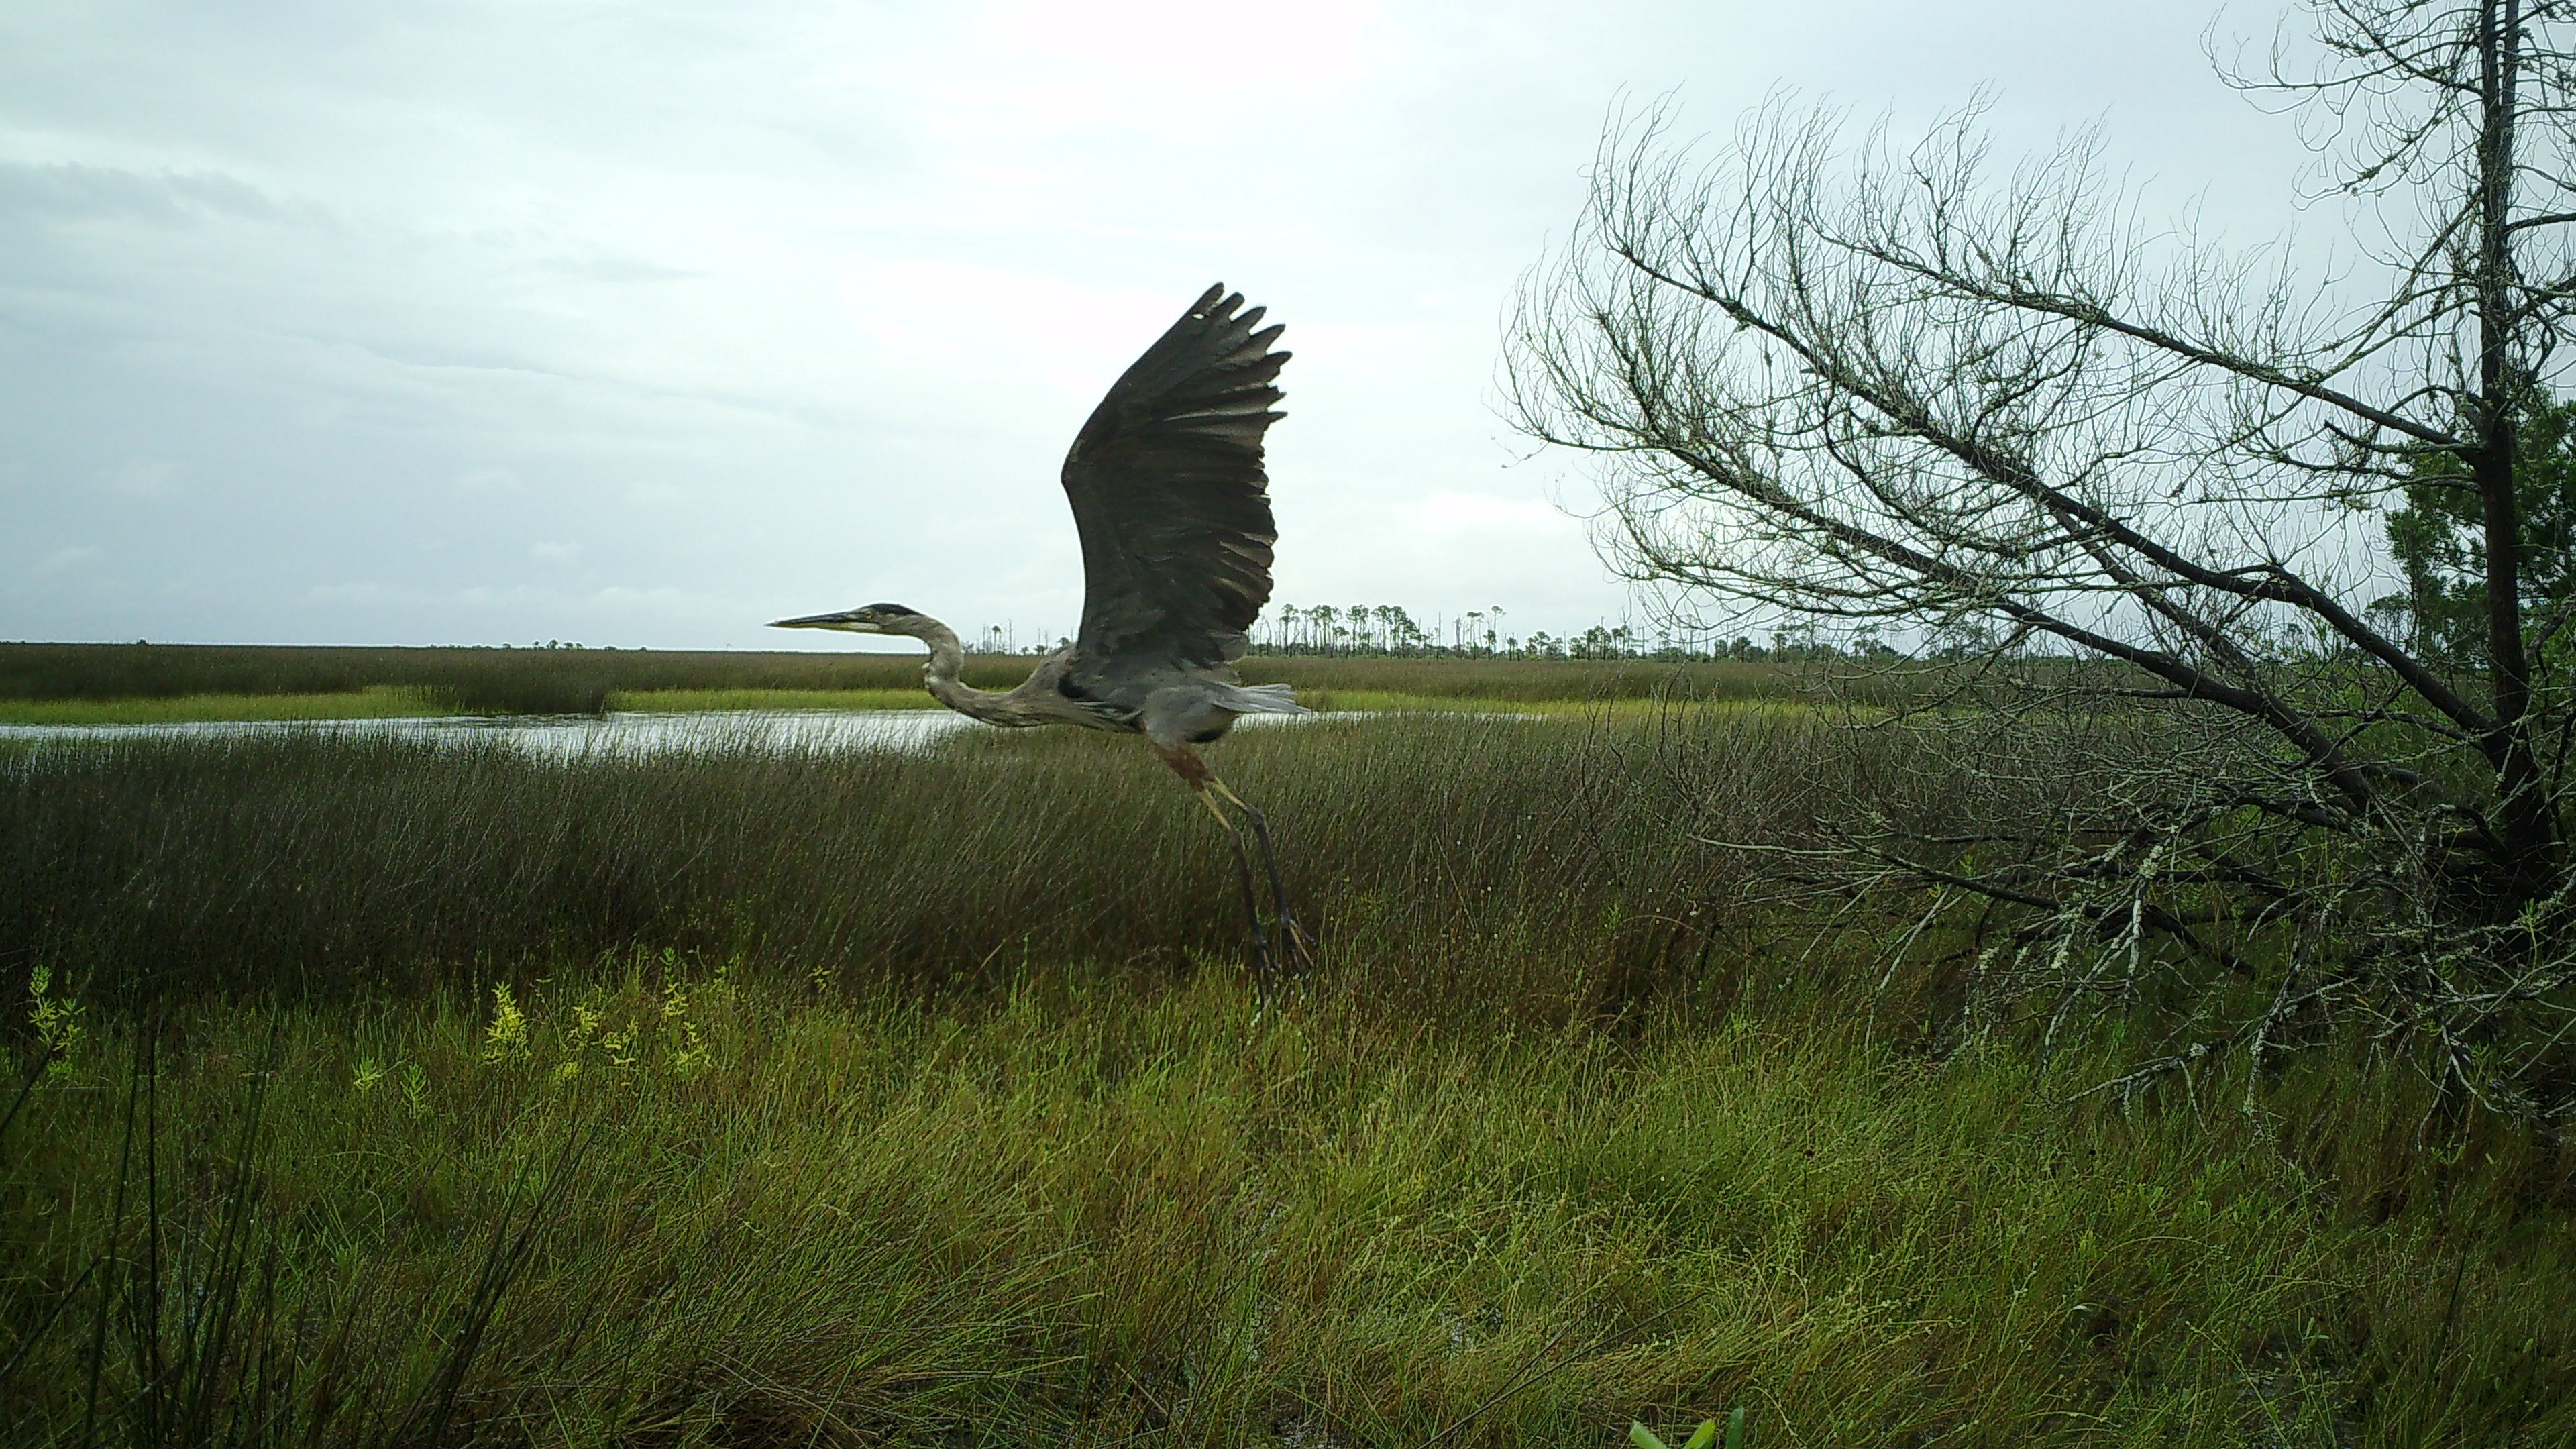 A heron—a large beige and gray bird with a long, goose-like neck—with outstretched wings takes flight in an expansive marsh, with tall grasses bisected by a waterway in the background and a few trees visible in the foreground and distant background.